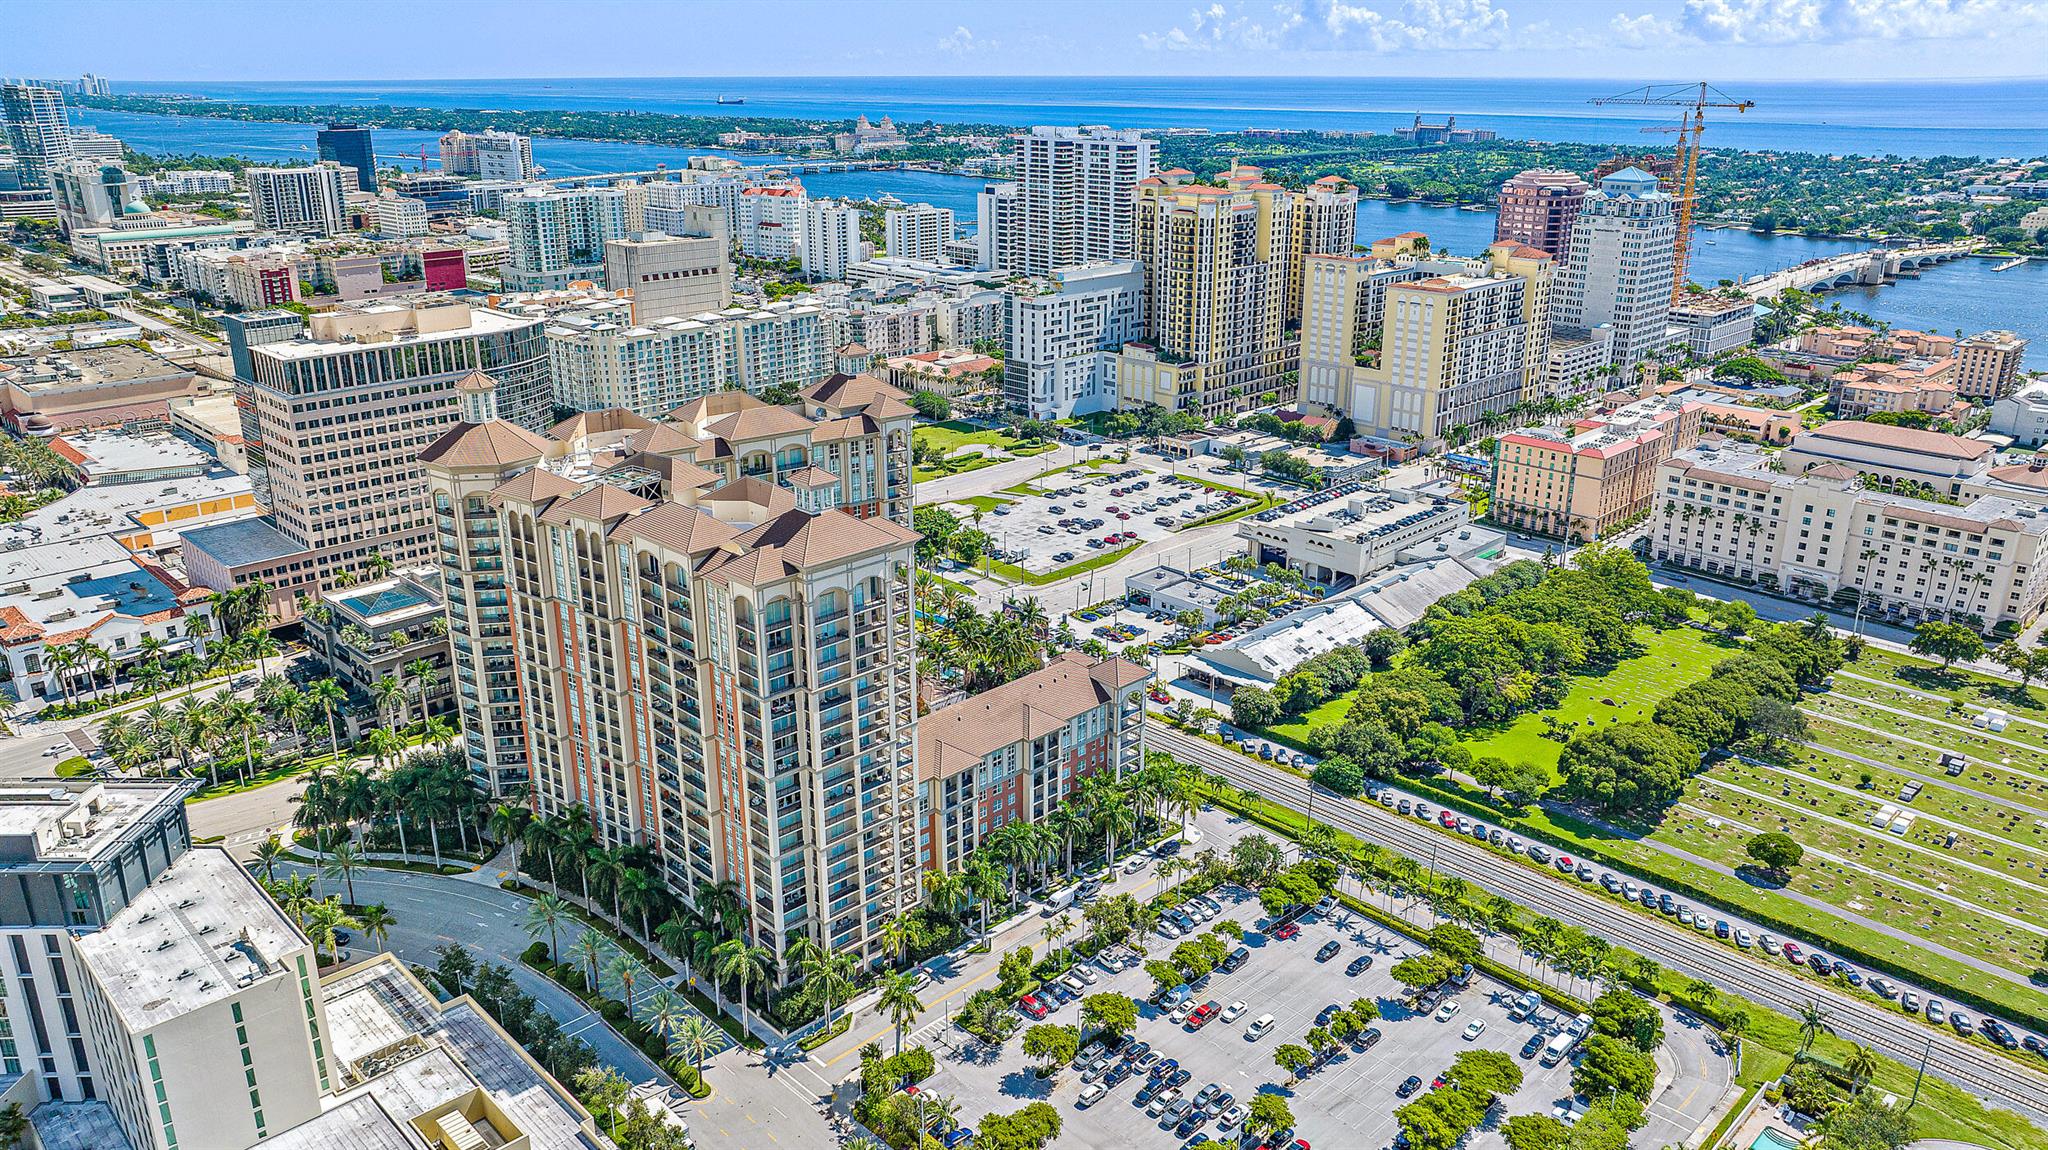 Photo 39 of Cityplace South Tower Con Apt 1615 in West Palm Beach - MLS R10917518